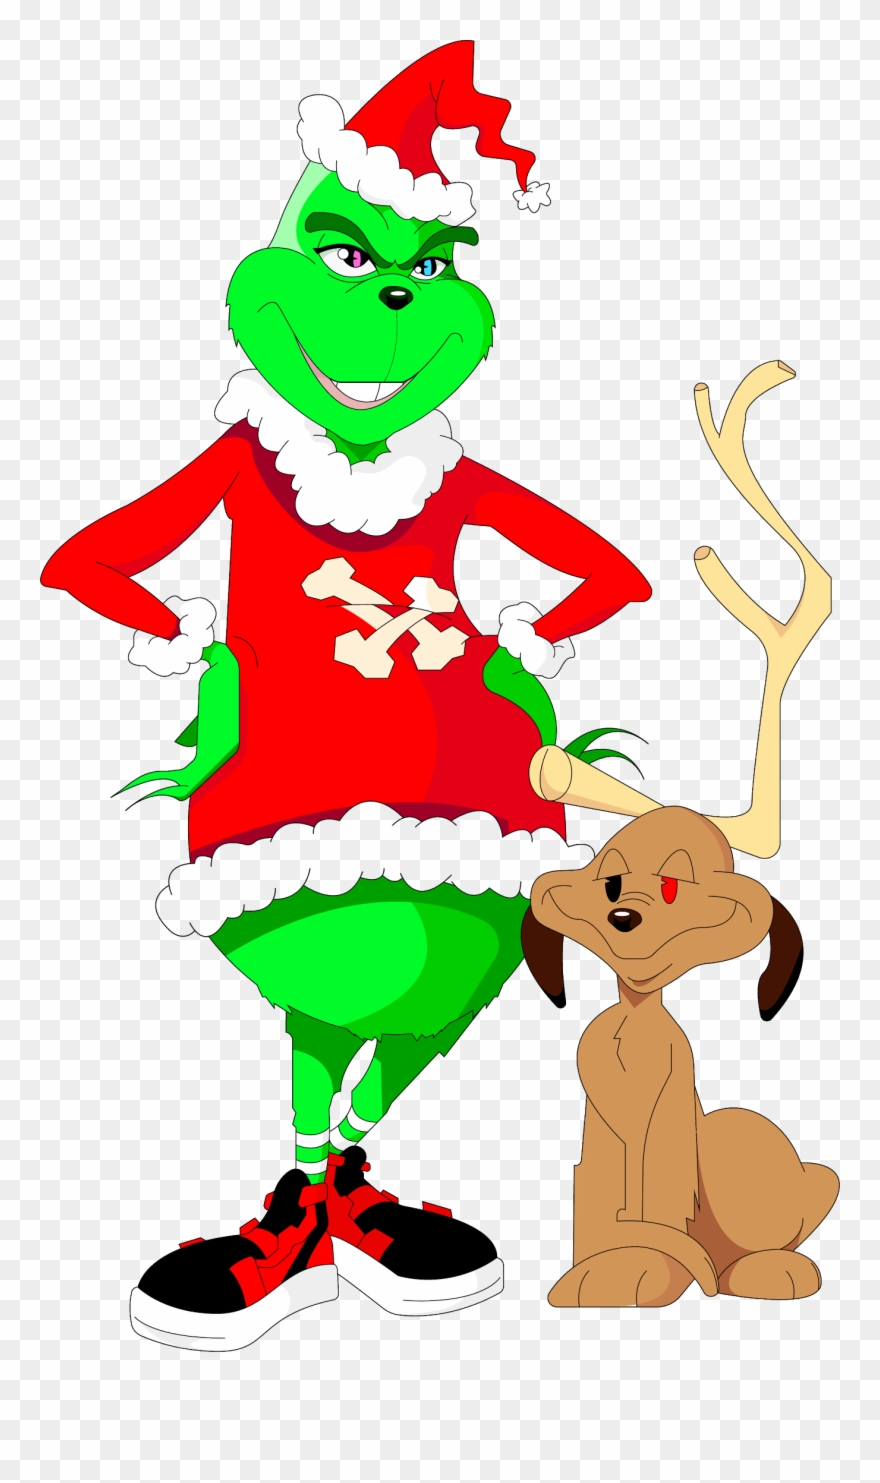 Image Of The Grinch.